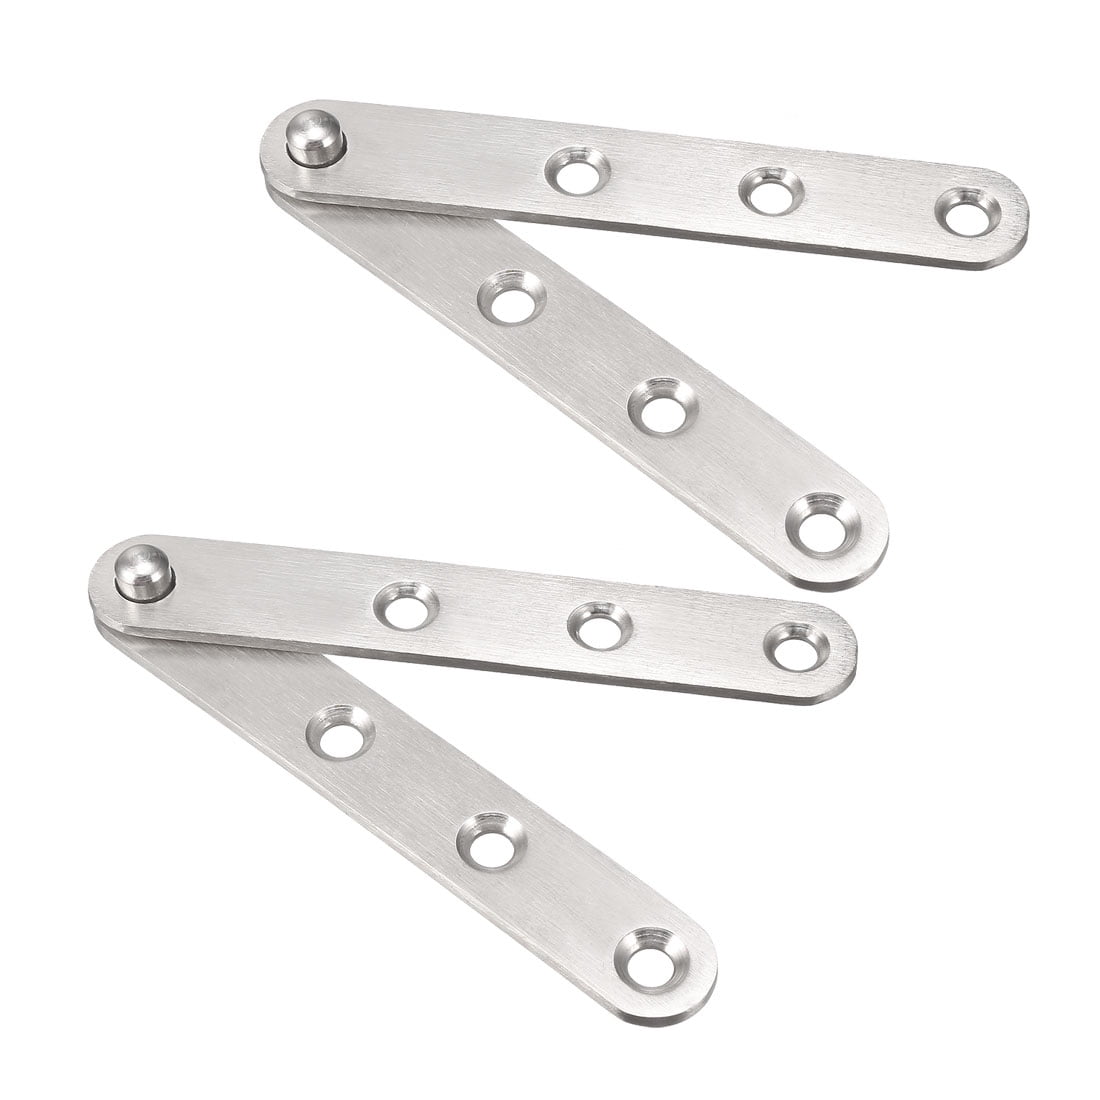 2 Pcs Silver Tone Stainless Steel 3 Holes Foldable Rotating Cabinet Door Hinge 2.5